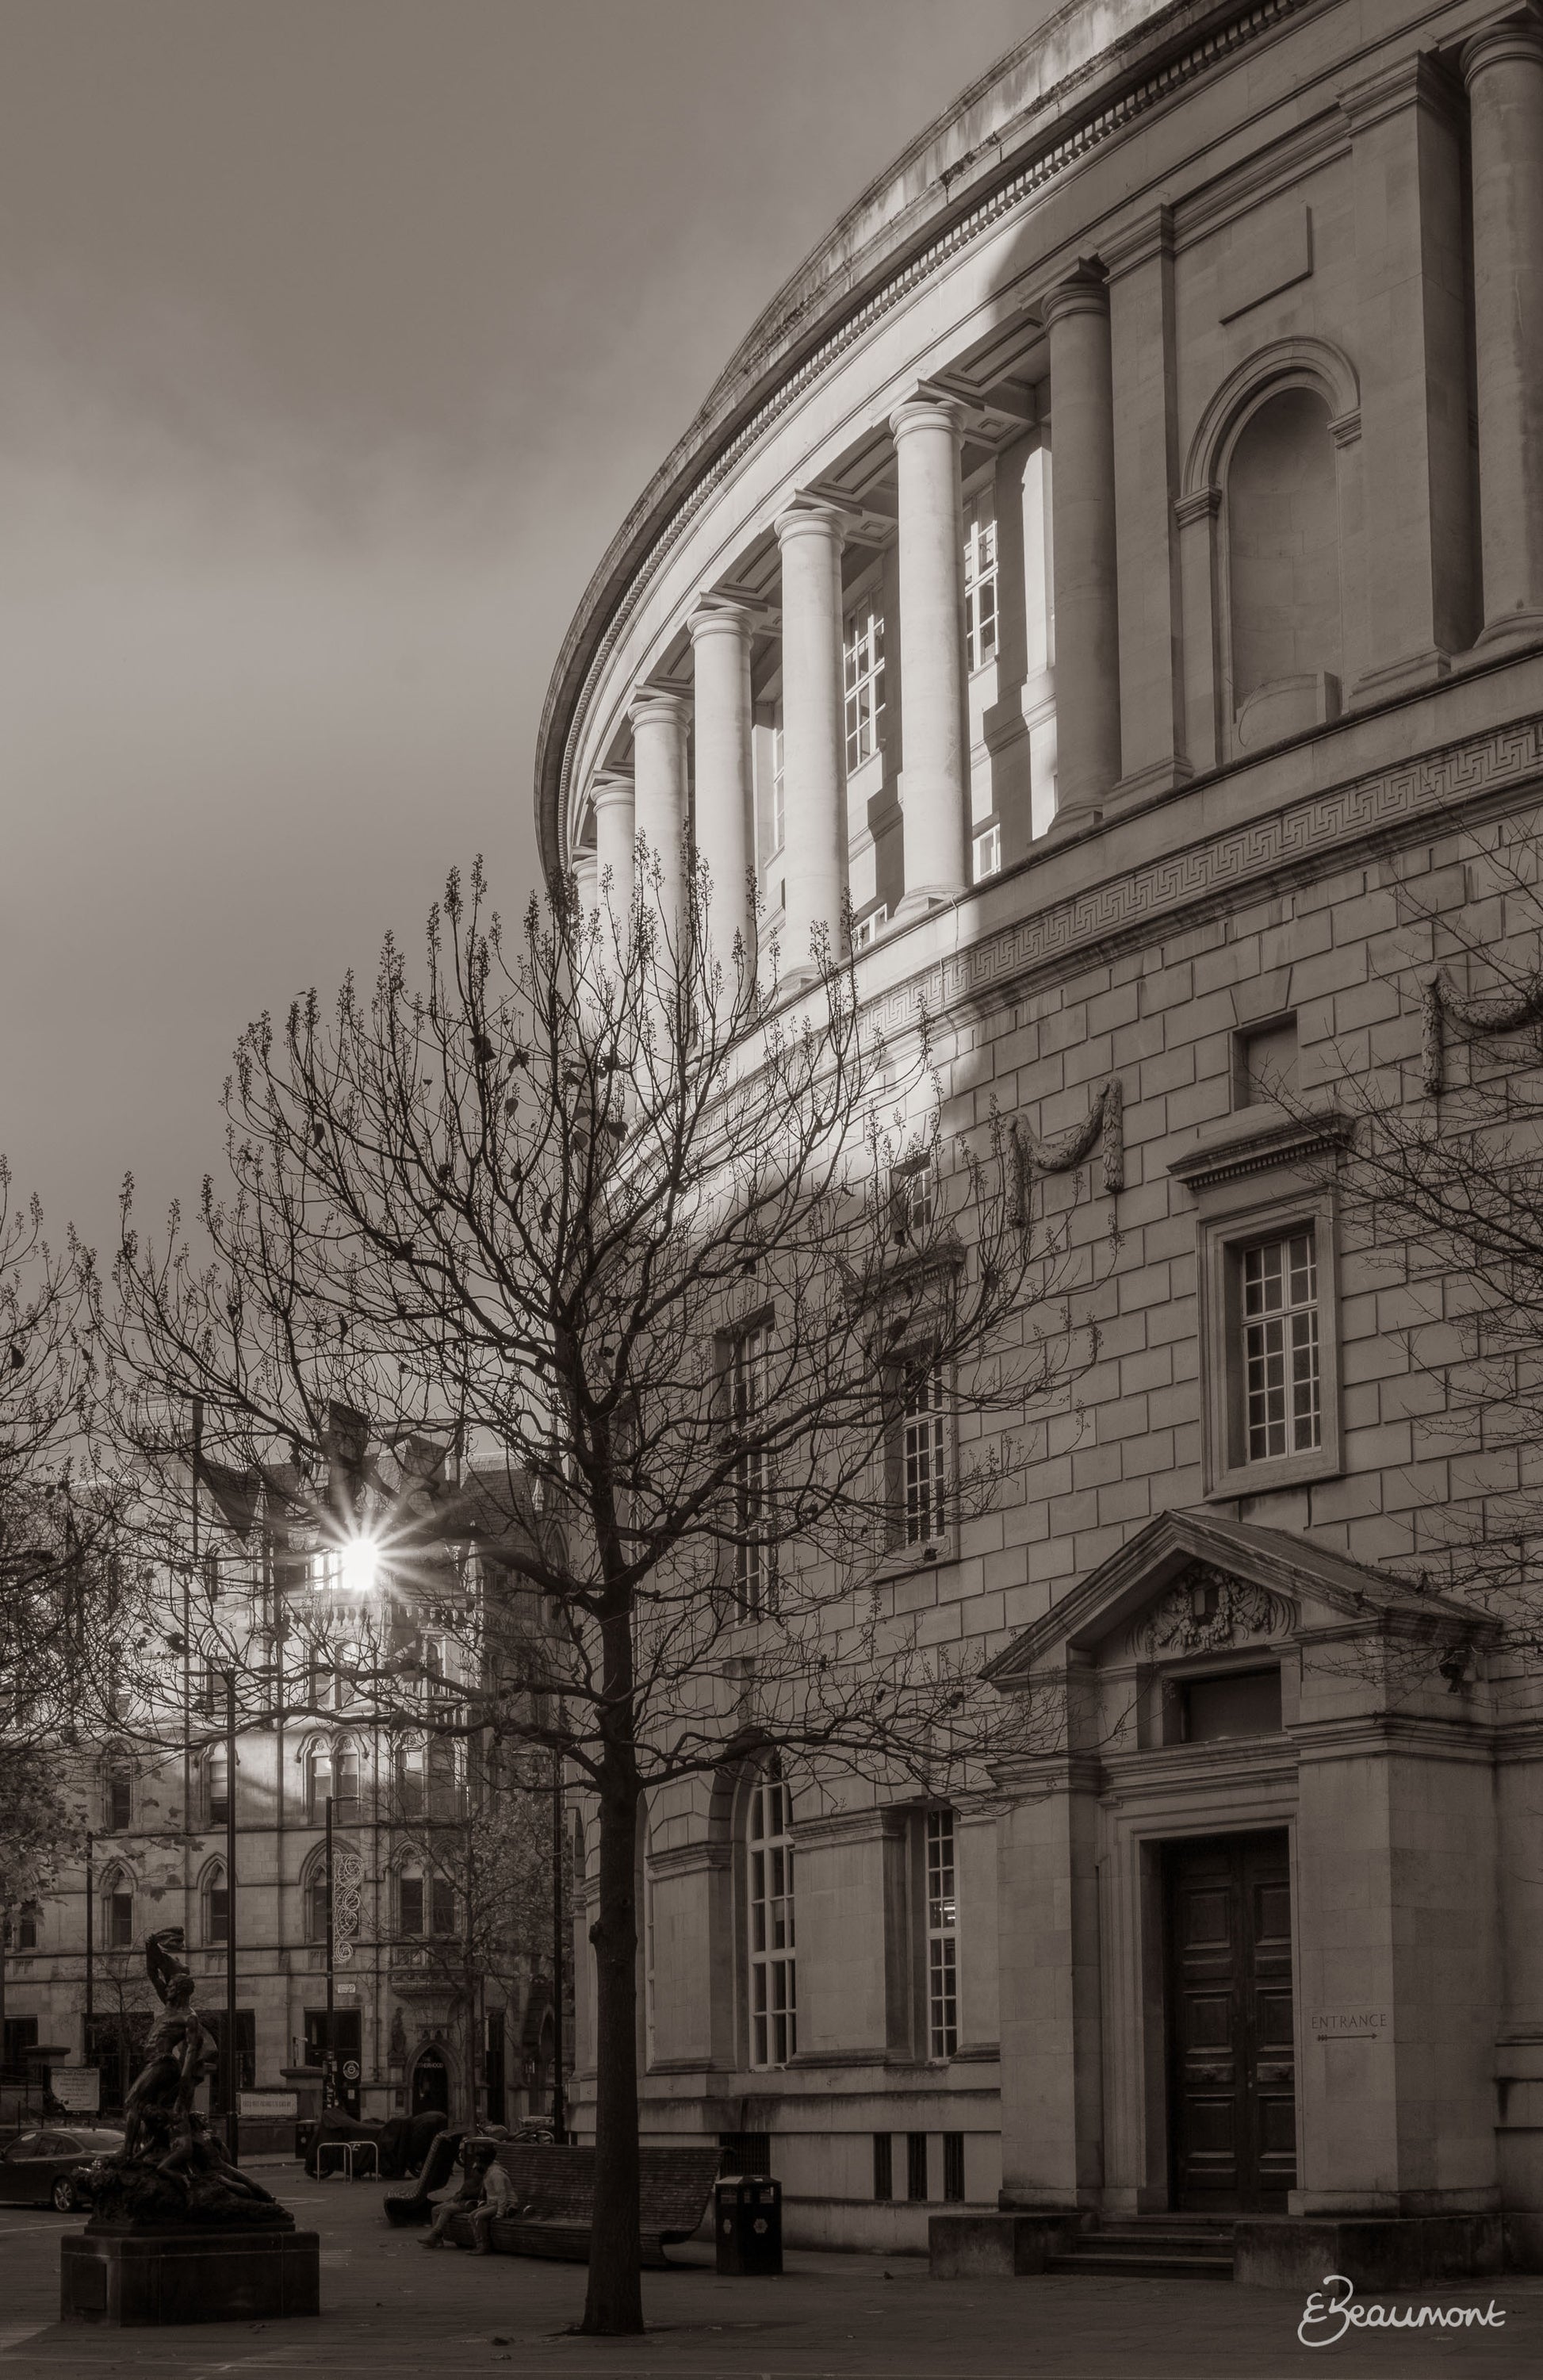 Manchester's Historic Central Library - Smolensky Gallery